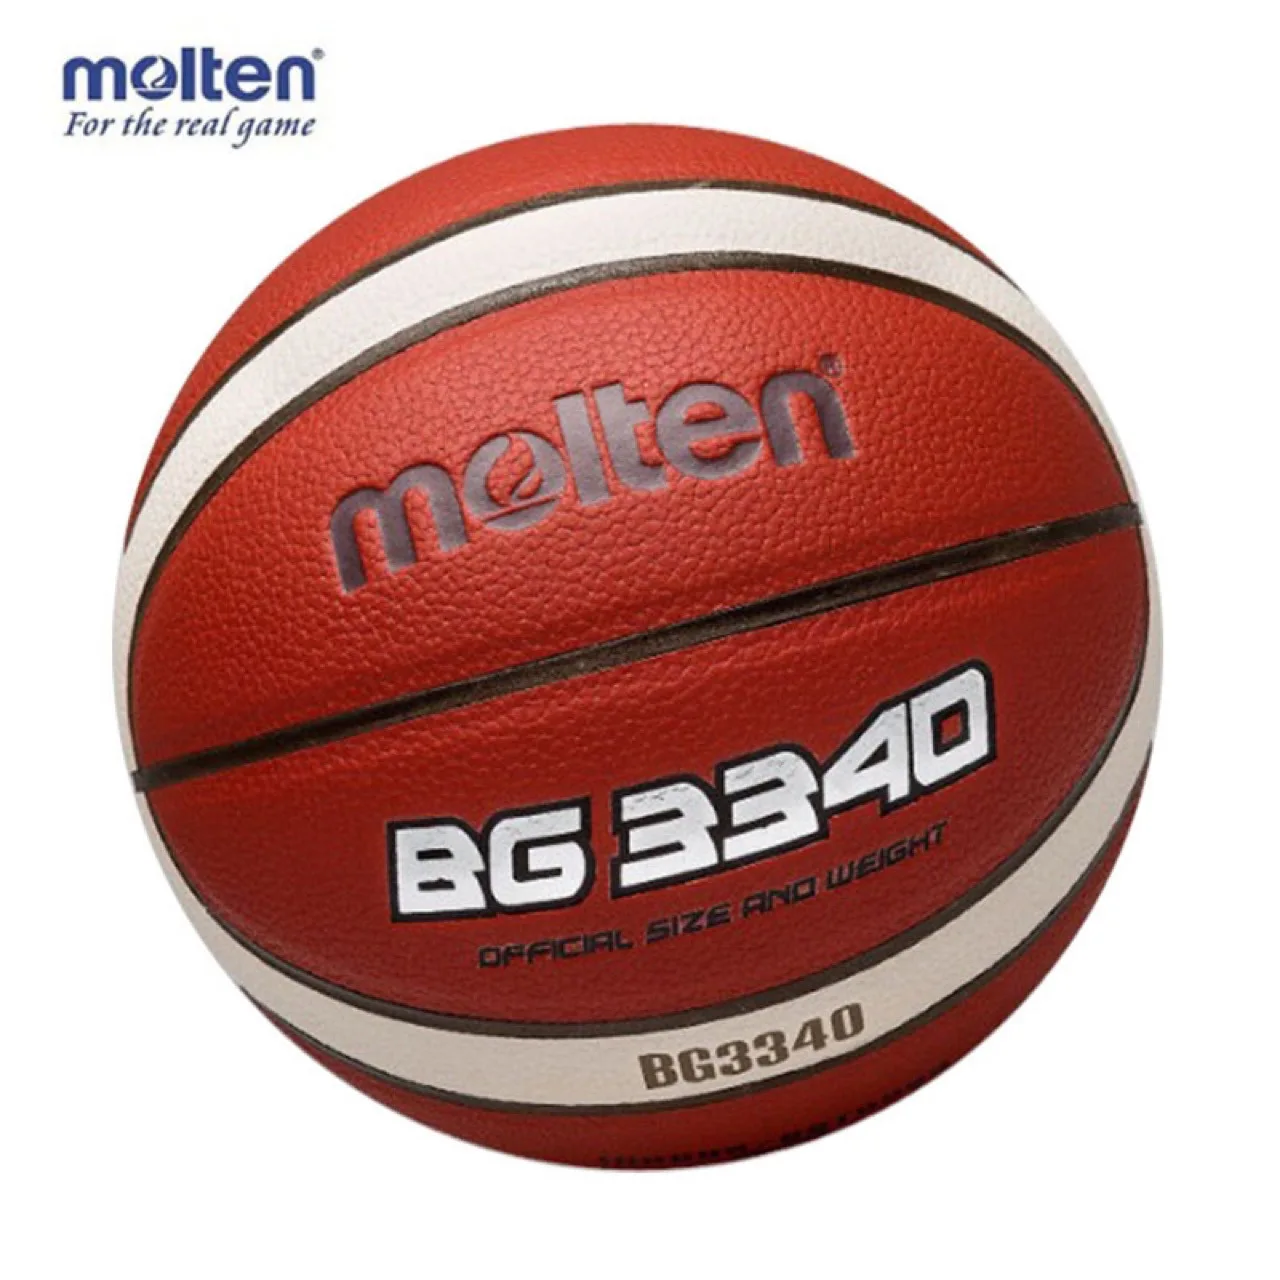 

Molten BG3340 official basketball indoor and outdoor match training general wear resistant grown man authentic blue ball Magic